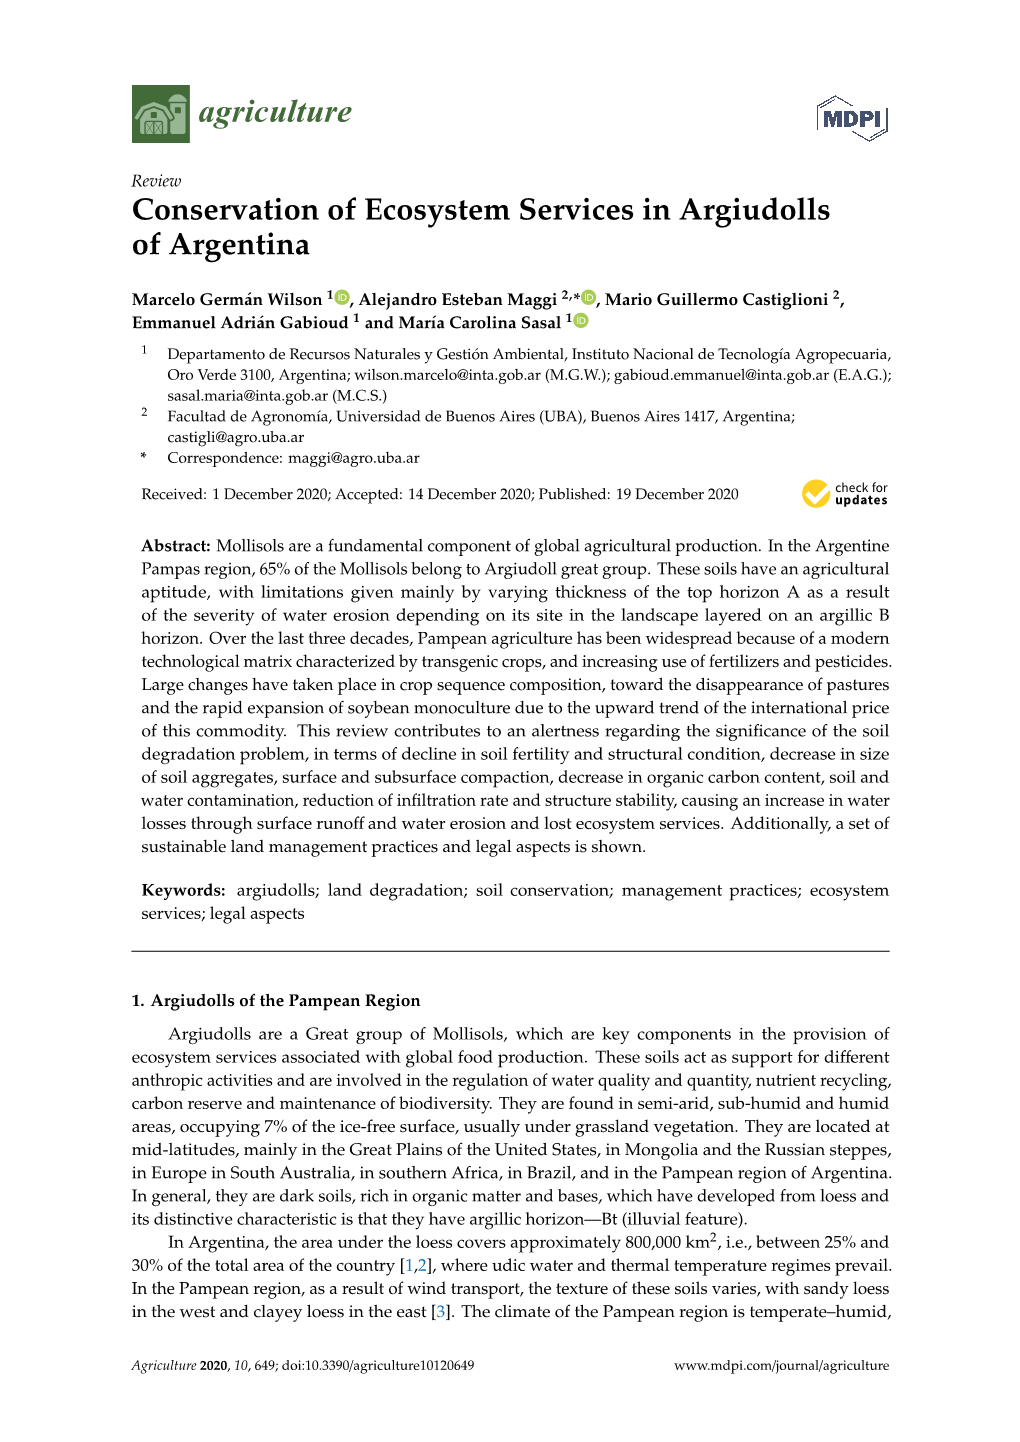 Conservation of Ecosystem Services in Argiudolls of Argentina